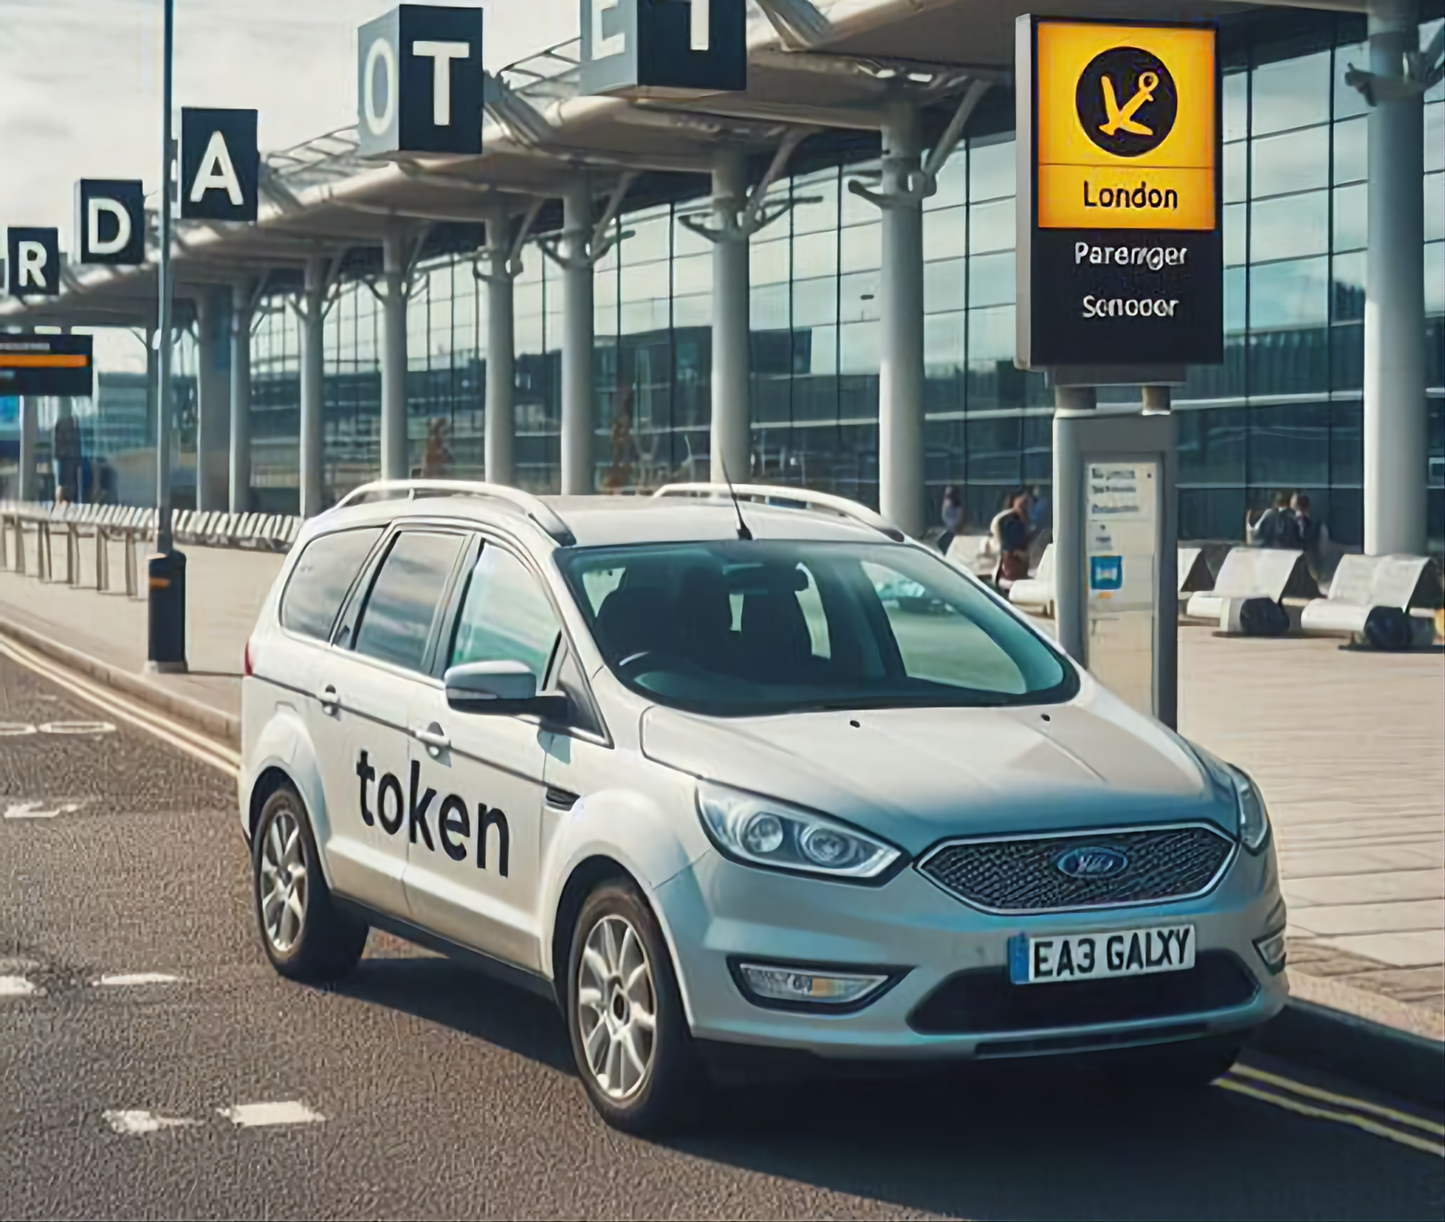 Any London Airport Token: Pick-Up